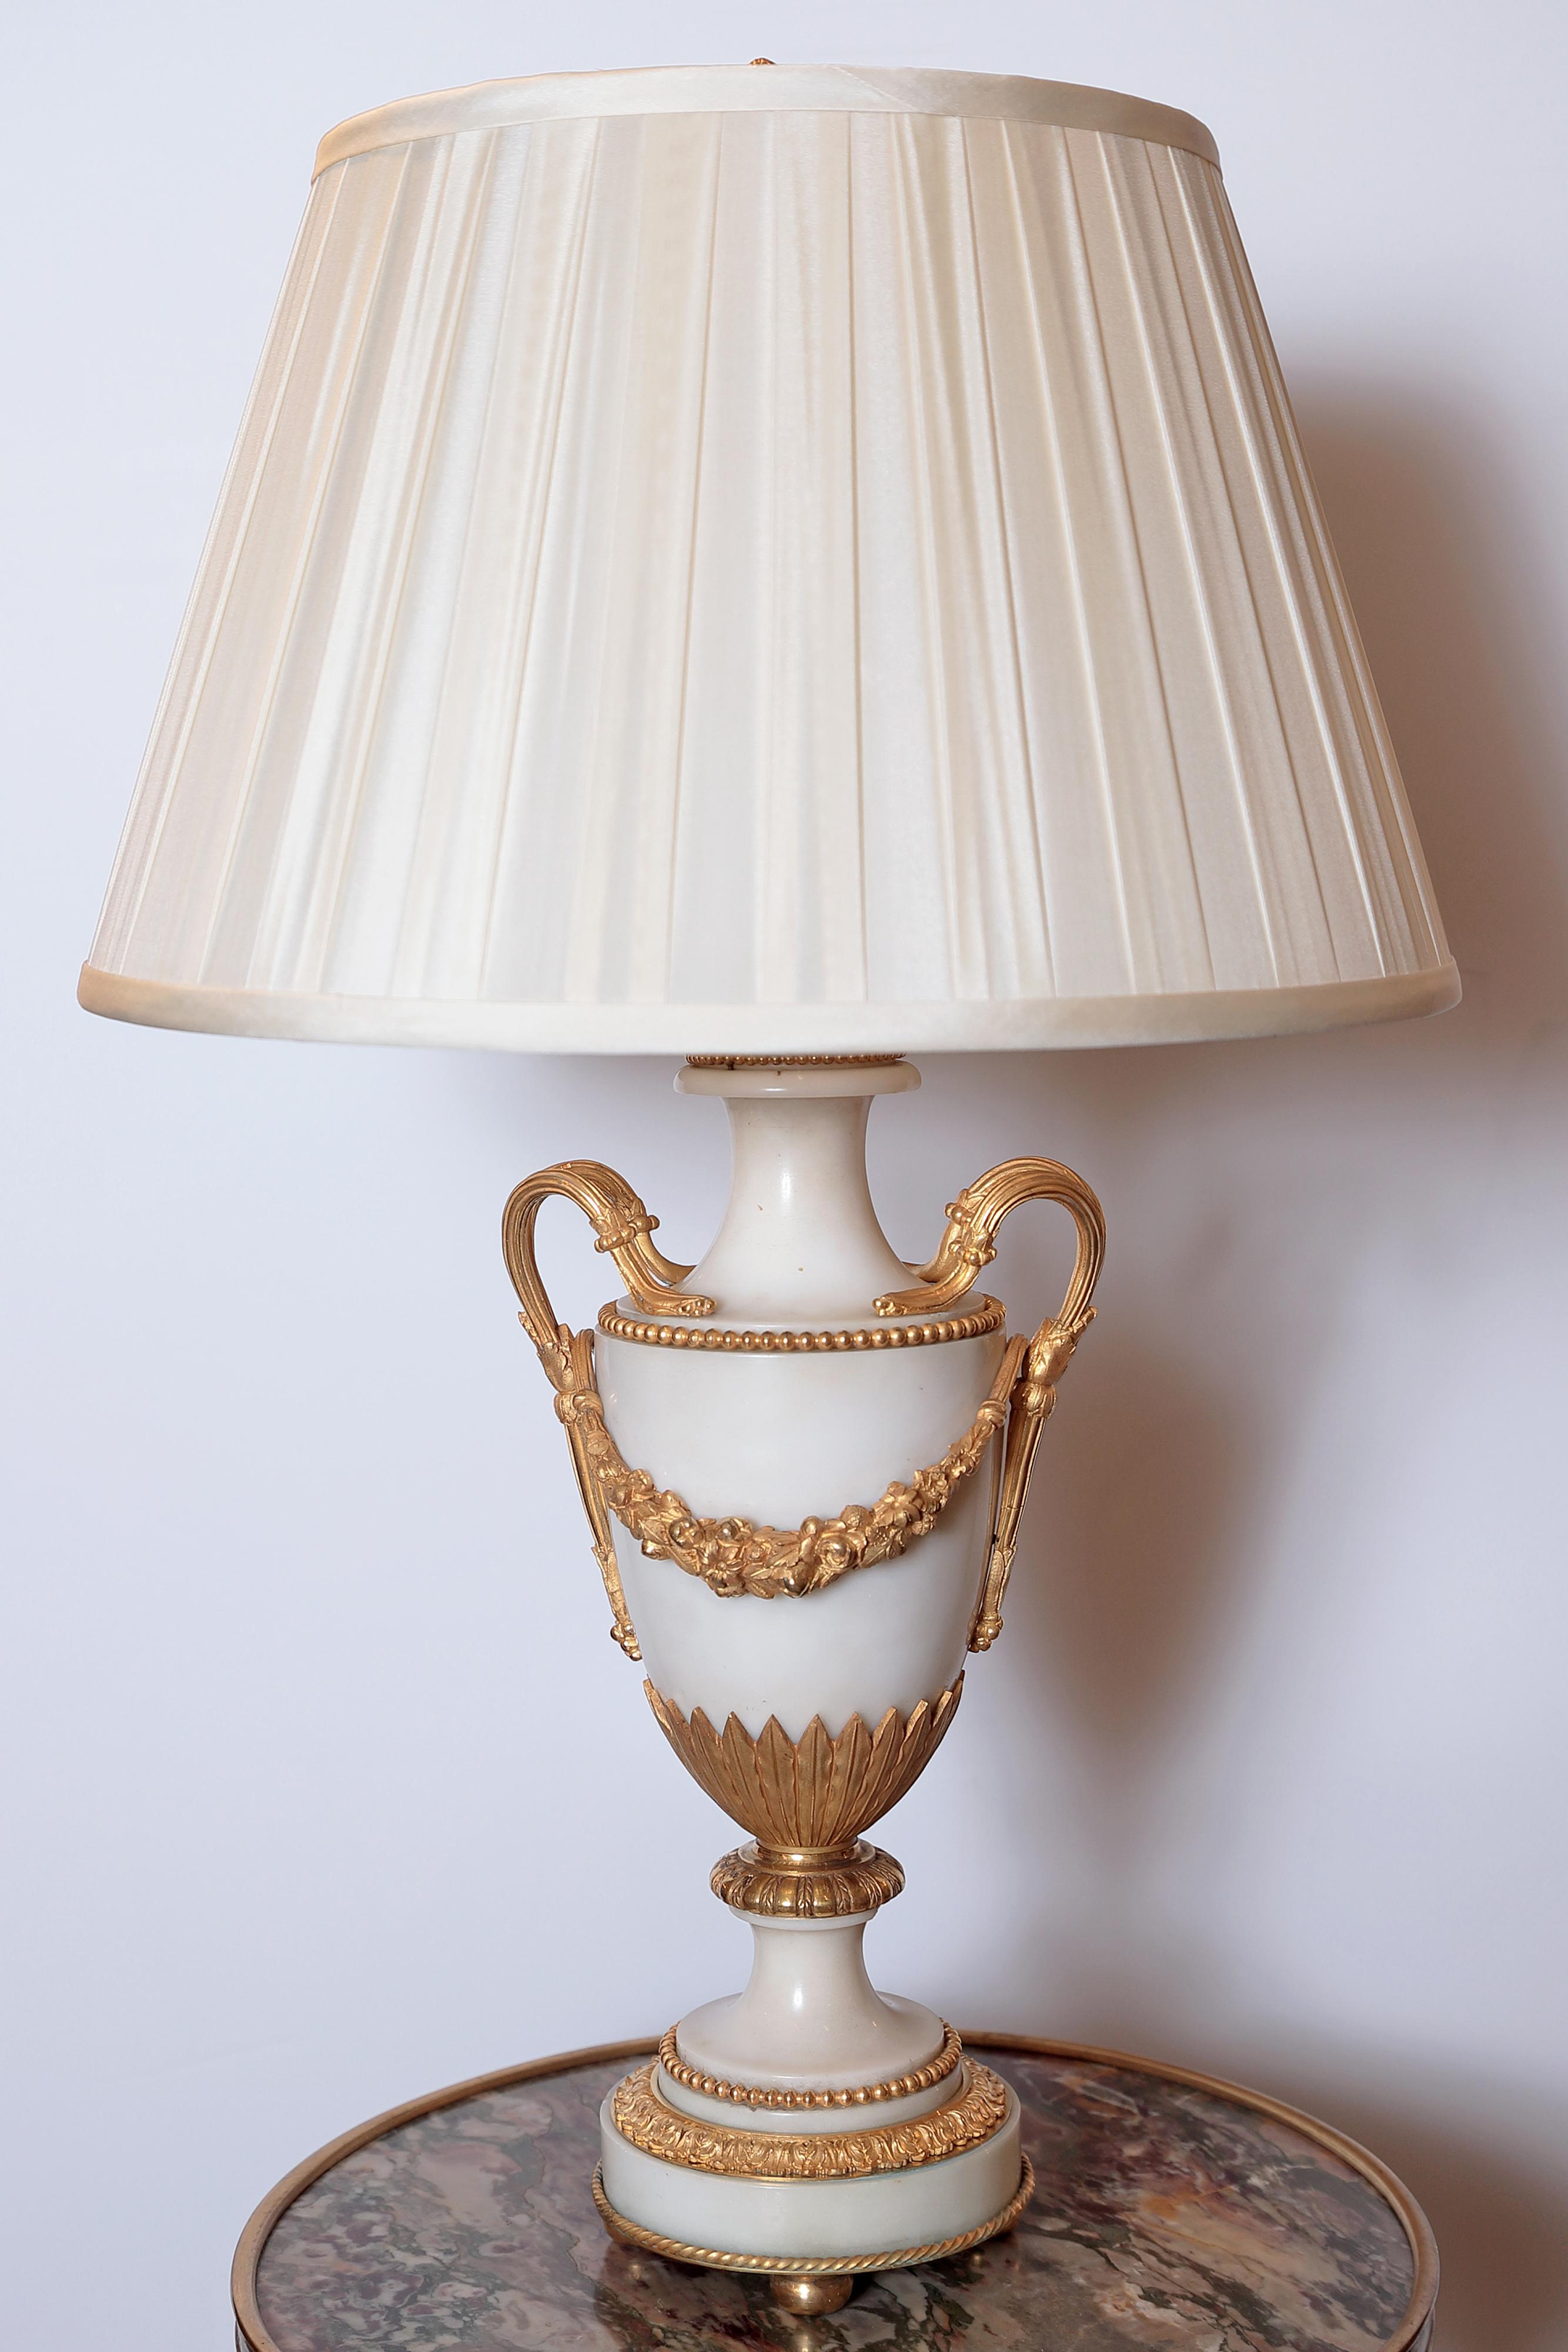 A fine pair of French 19th century Louis XVI Carrara marble and gilt bronze urn lamps. Custom wiring and shades.